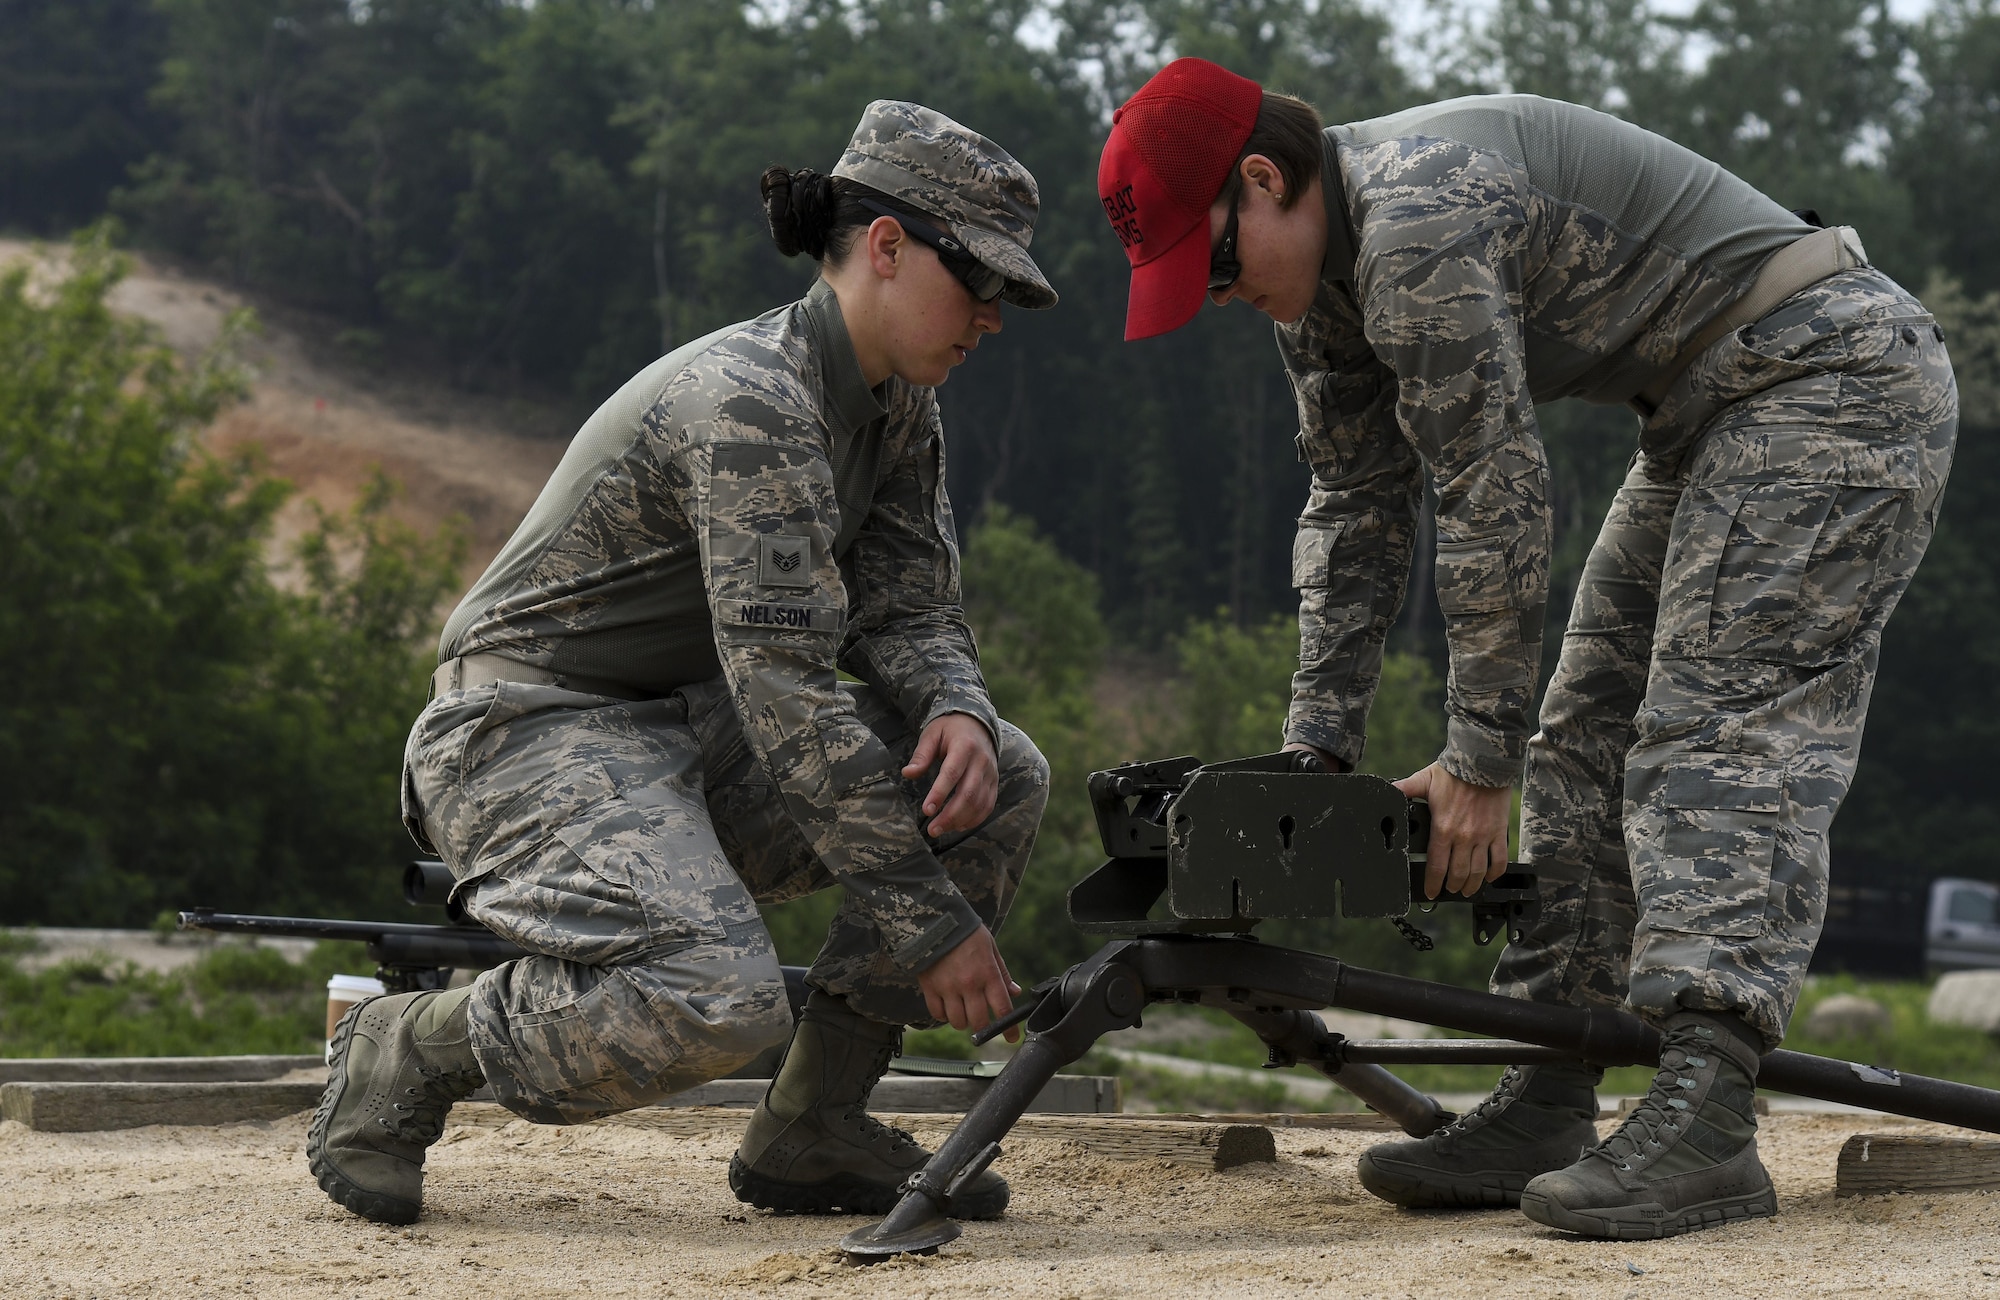 U.S. Air Force Staff Sgt. Catherine Nelson, 8th Security Forces Squadron Armory NCO in charge, and Staff Sgt. Kayla Hahn, 8th SFS Combat Arms instructor, set up an M2 machine gun during a weapons qualification training at Camp Rodriguez, Republic of Korea, May 23, 2017. Defenders from both the 51st and 8th SFSs participated in the training together to ensure both teams are ready to employ weapons systems at a moment’s notice. (U.S. Air Force photo by Airman 1st Class Gwendalyn Smith)